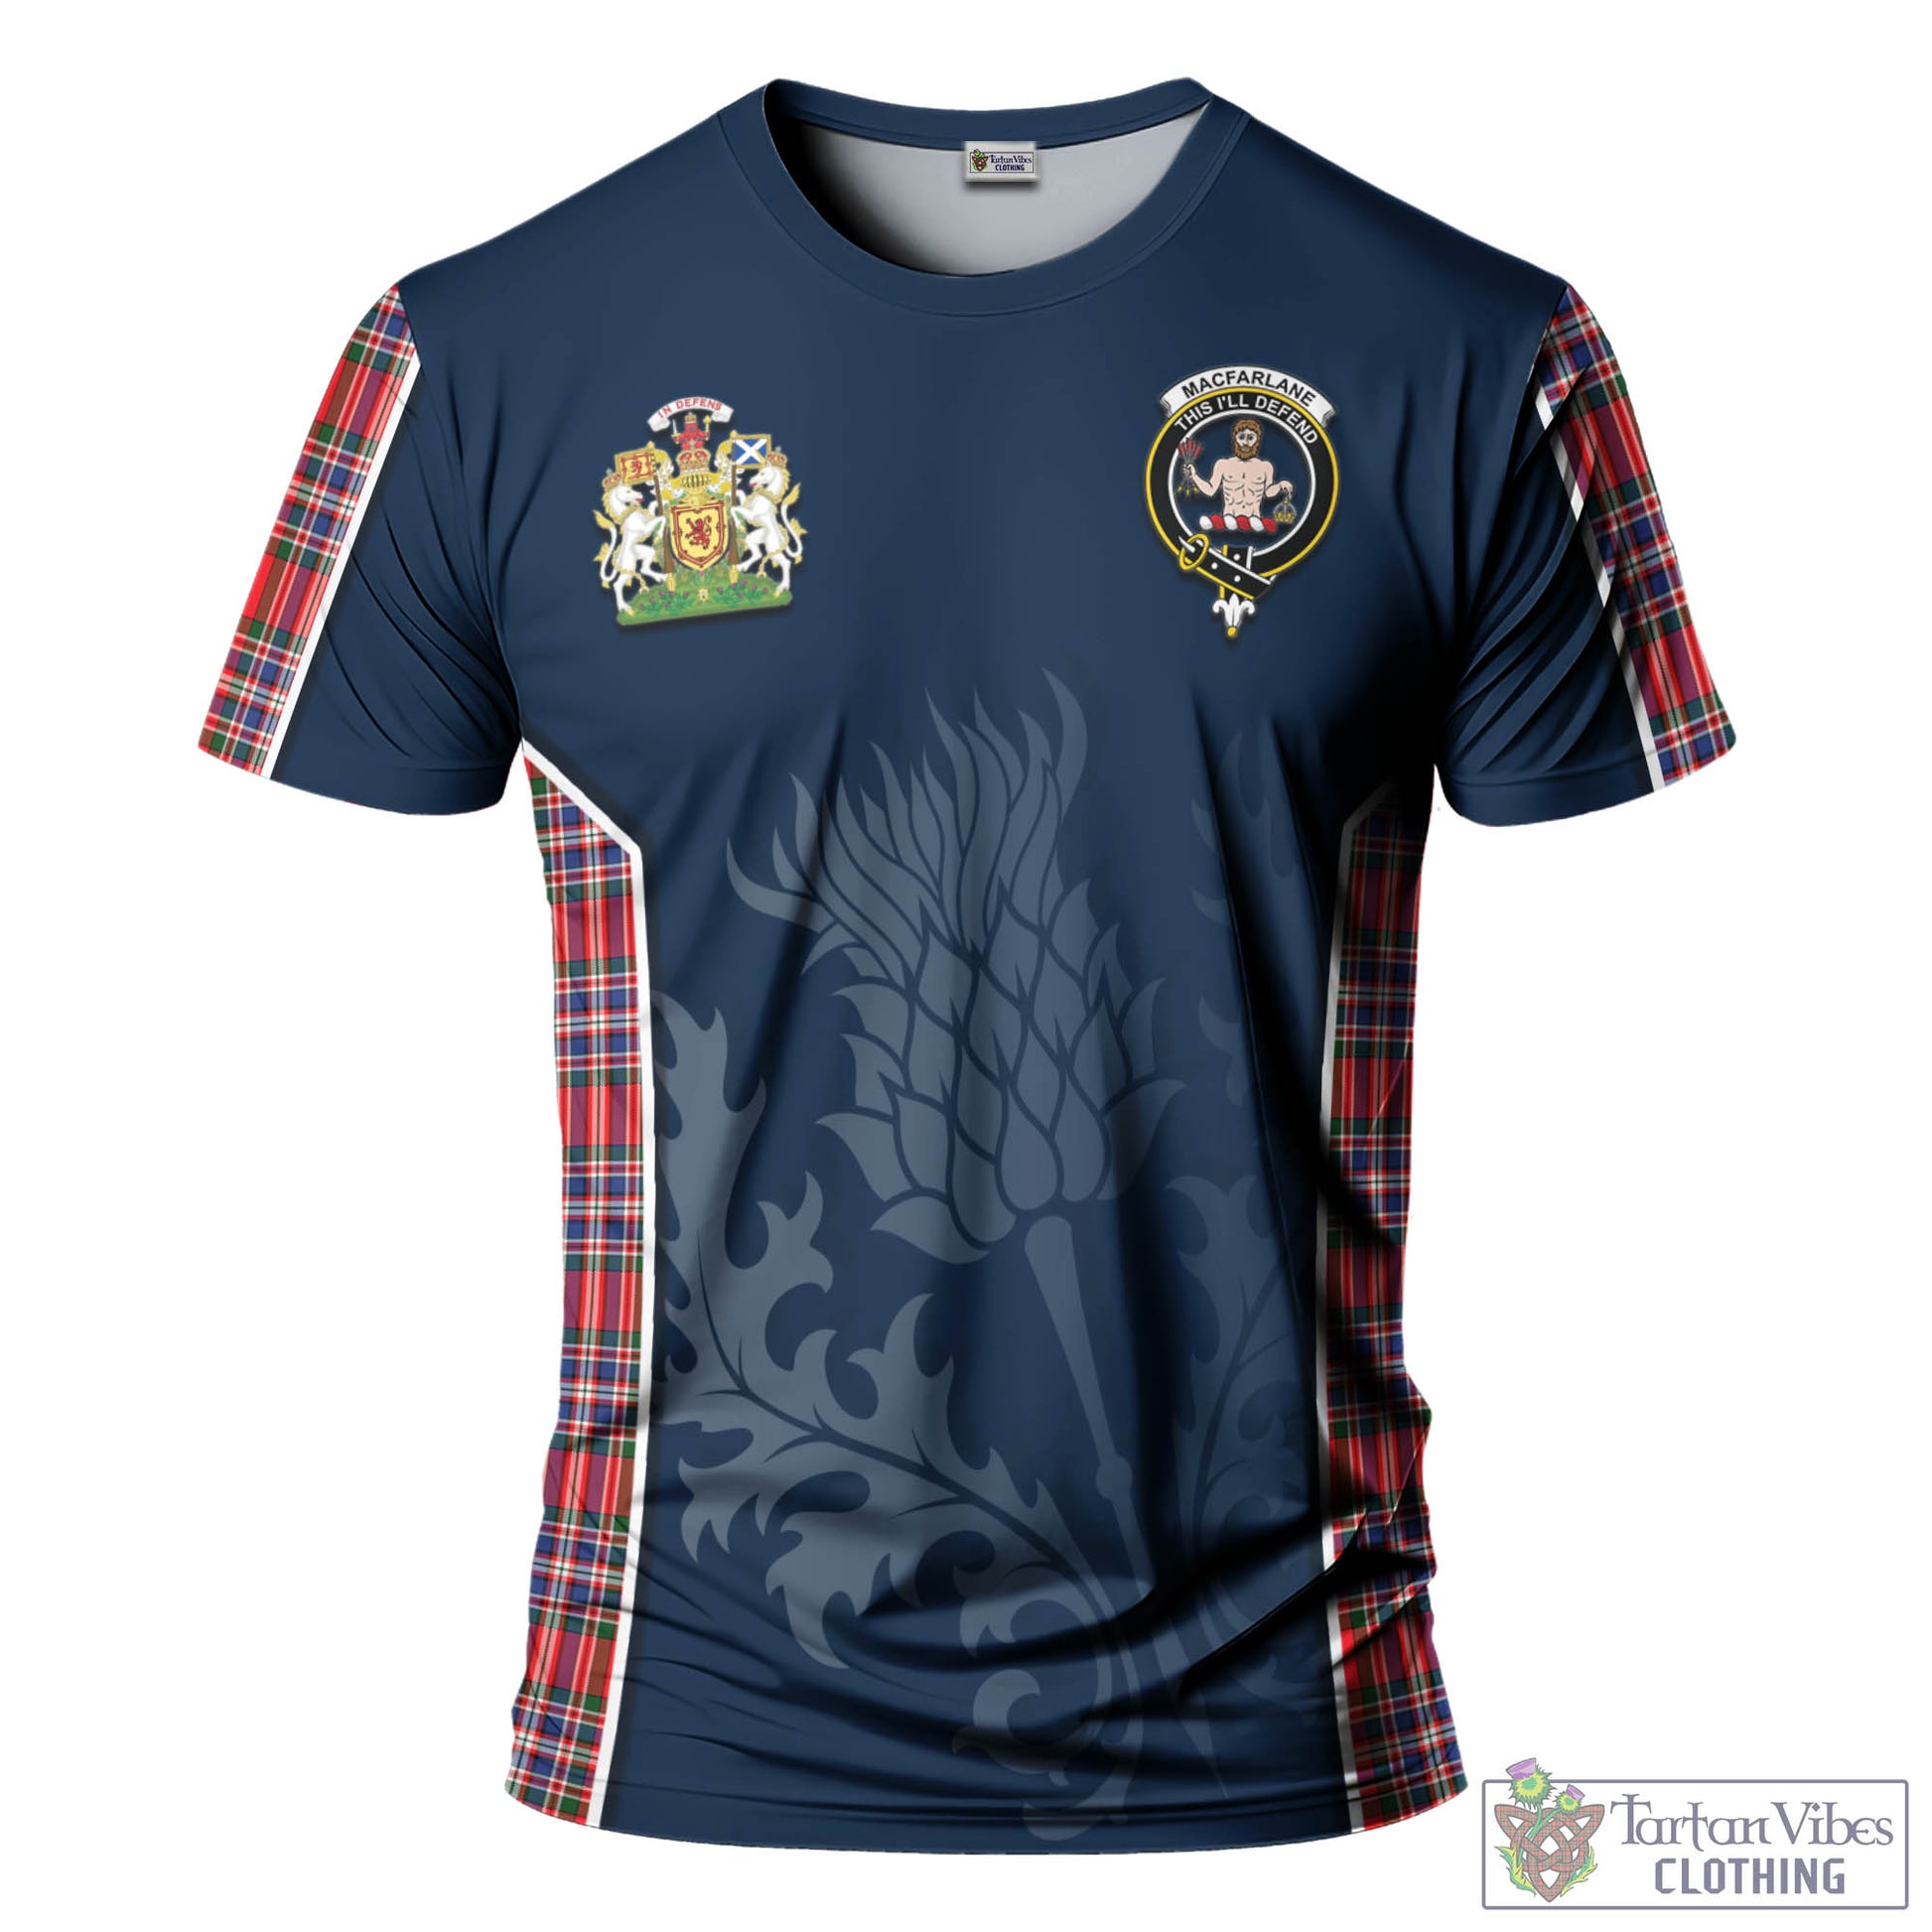 Tartan Vibes Clothing MacFarlane Modern Tartan T-Shirt with Family Crest and Scottish Thistle Vibes Sport Style